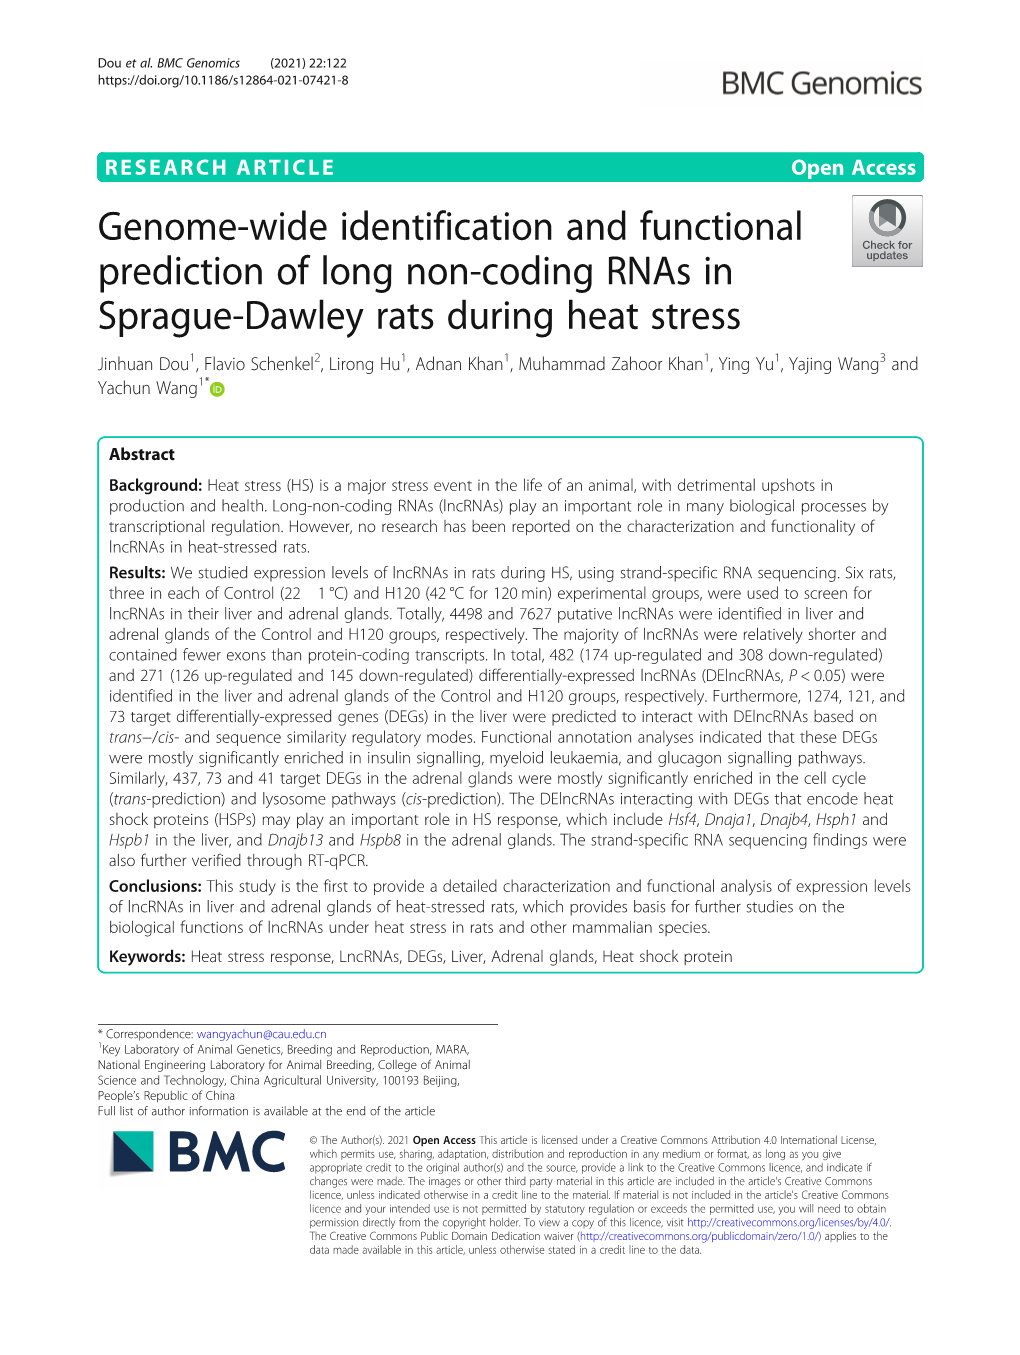 Genome-Wide Identification and Functional Prediction of Long Non